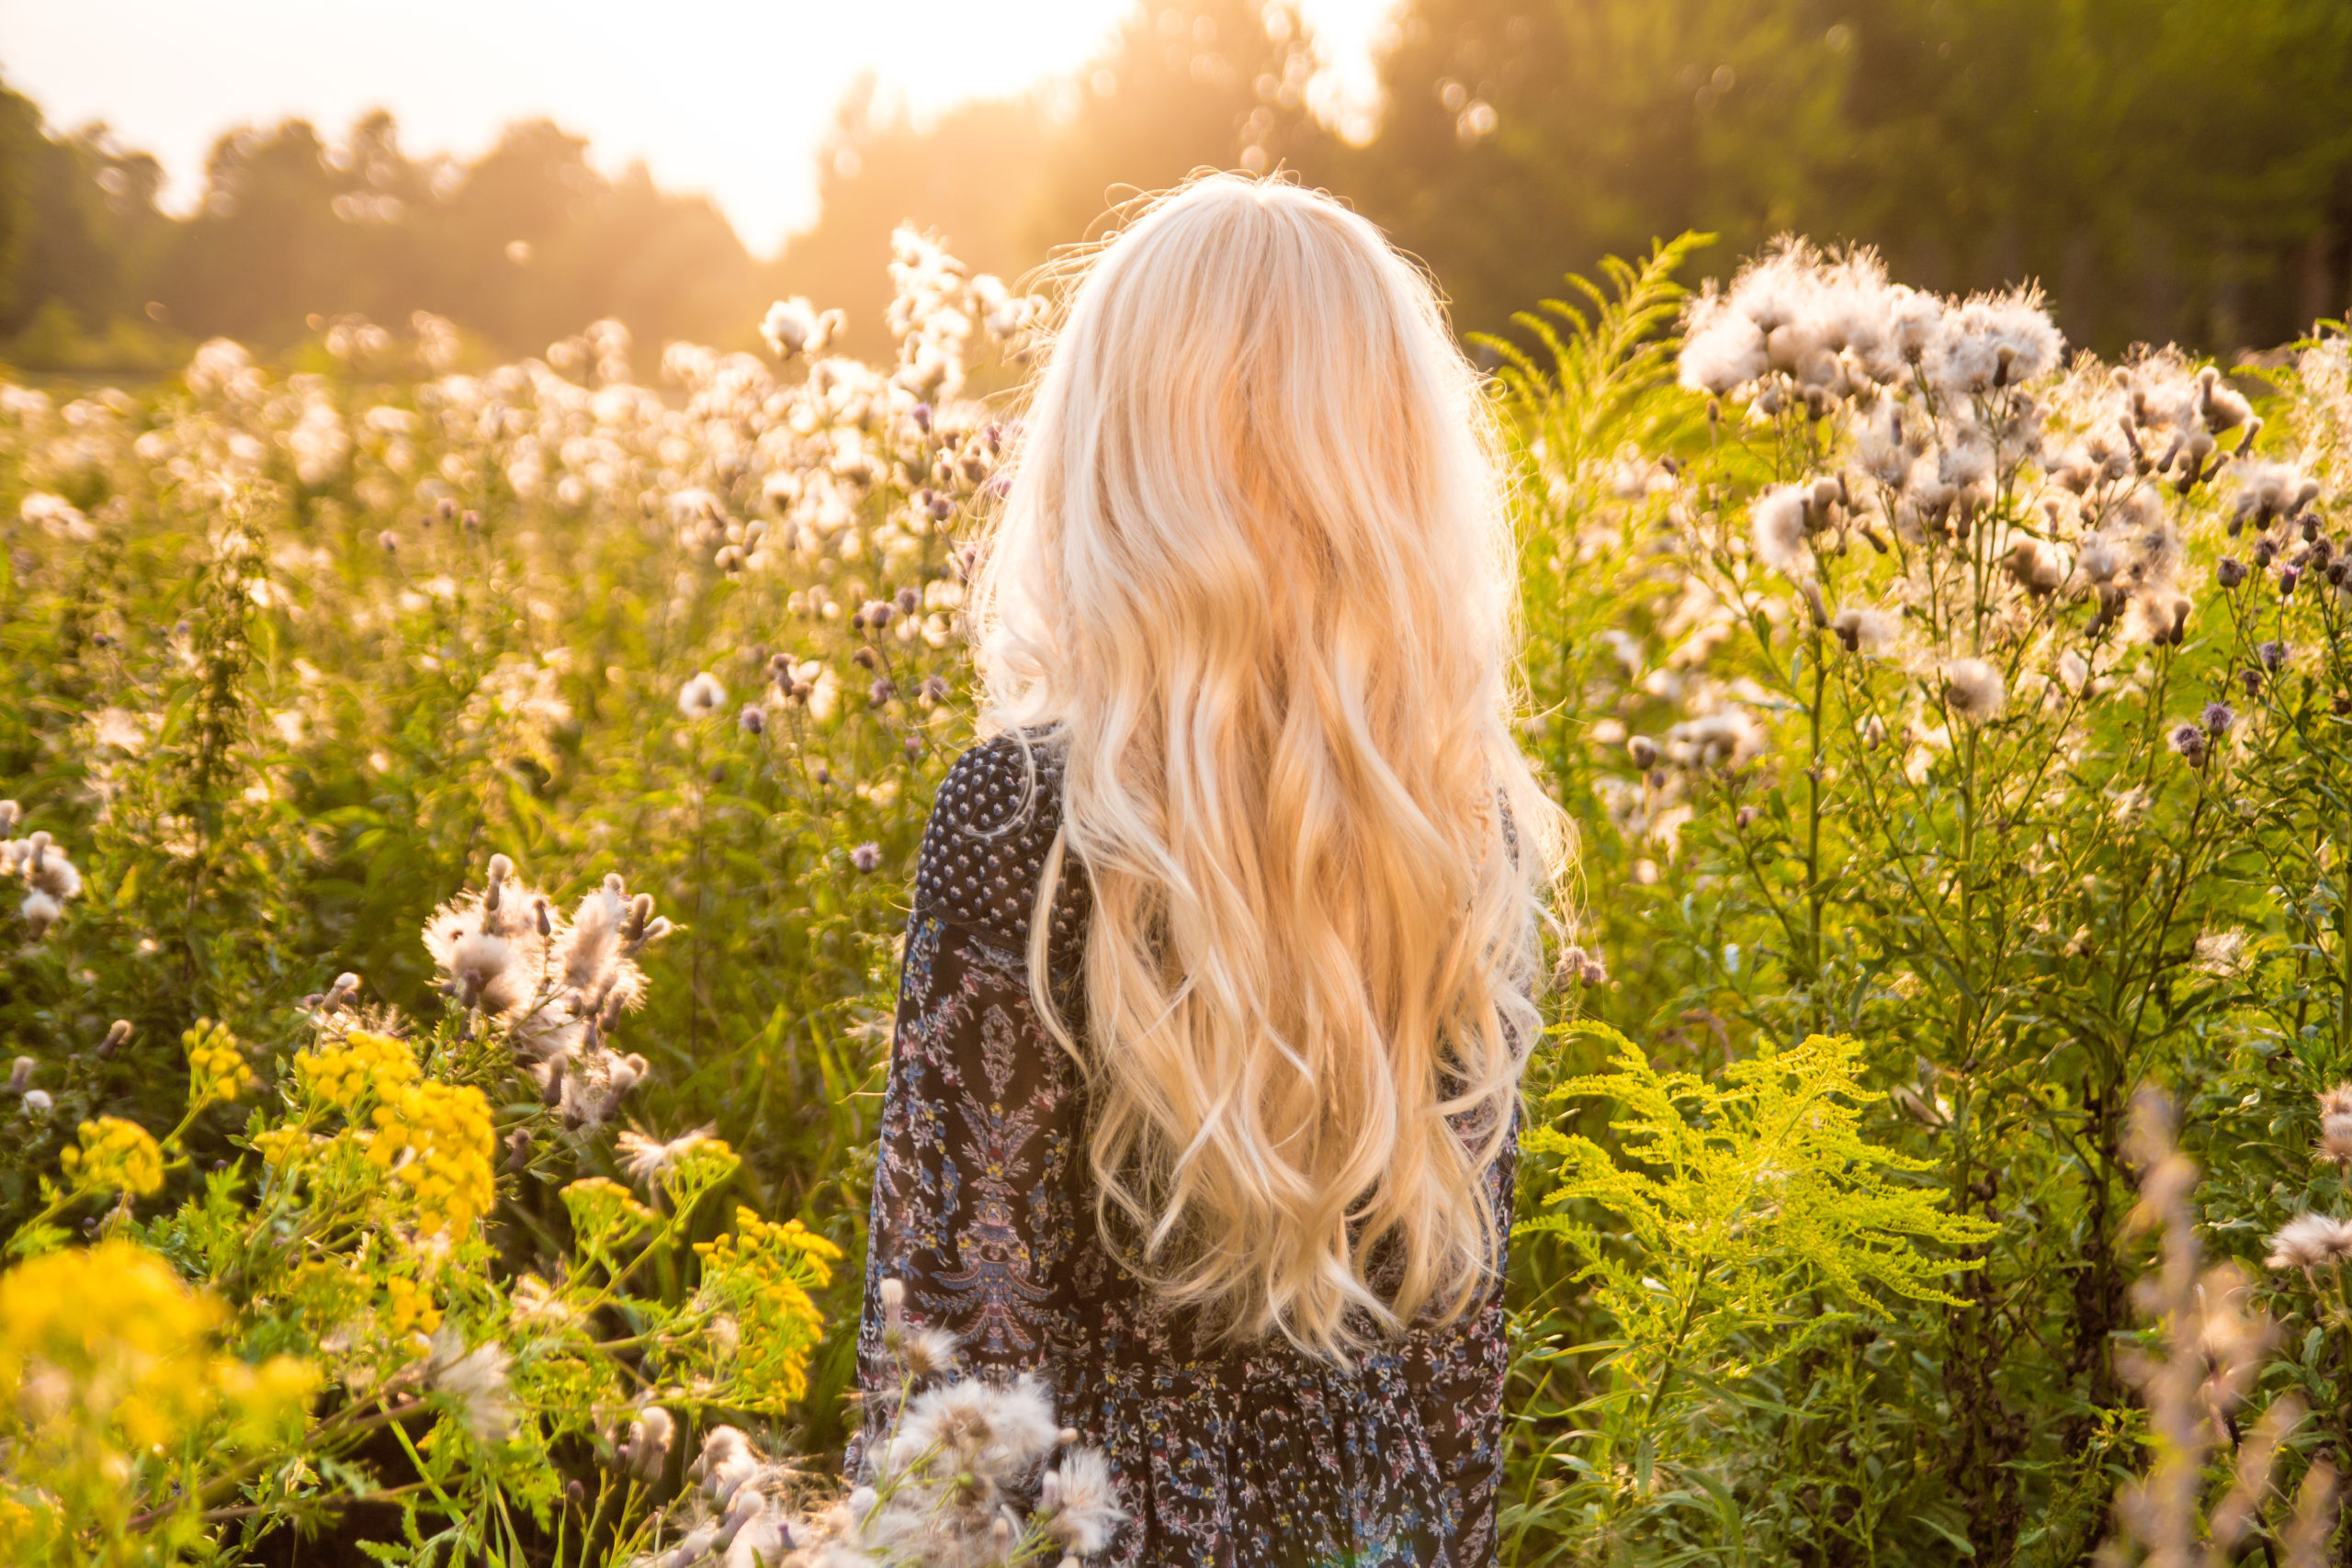 Long haired blond woman turned back on sunset meadov - outdoor image